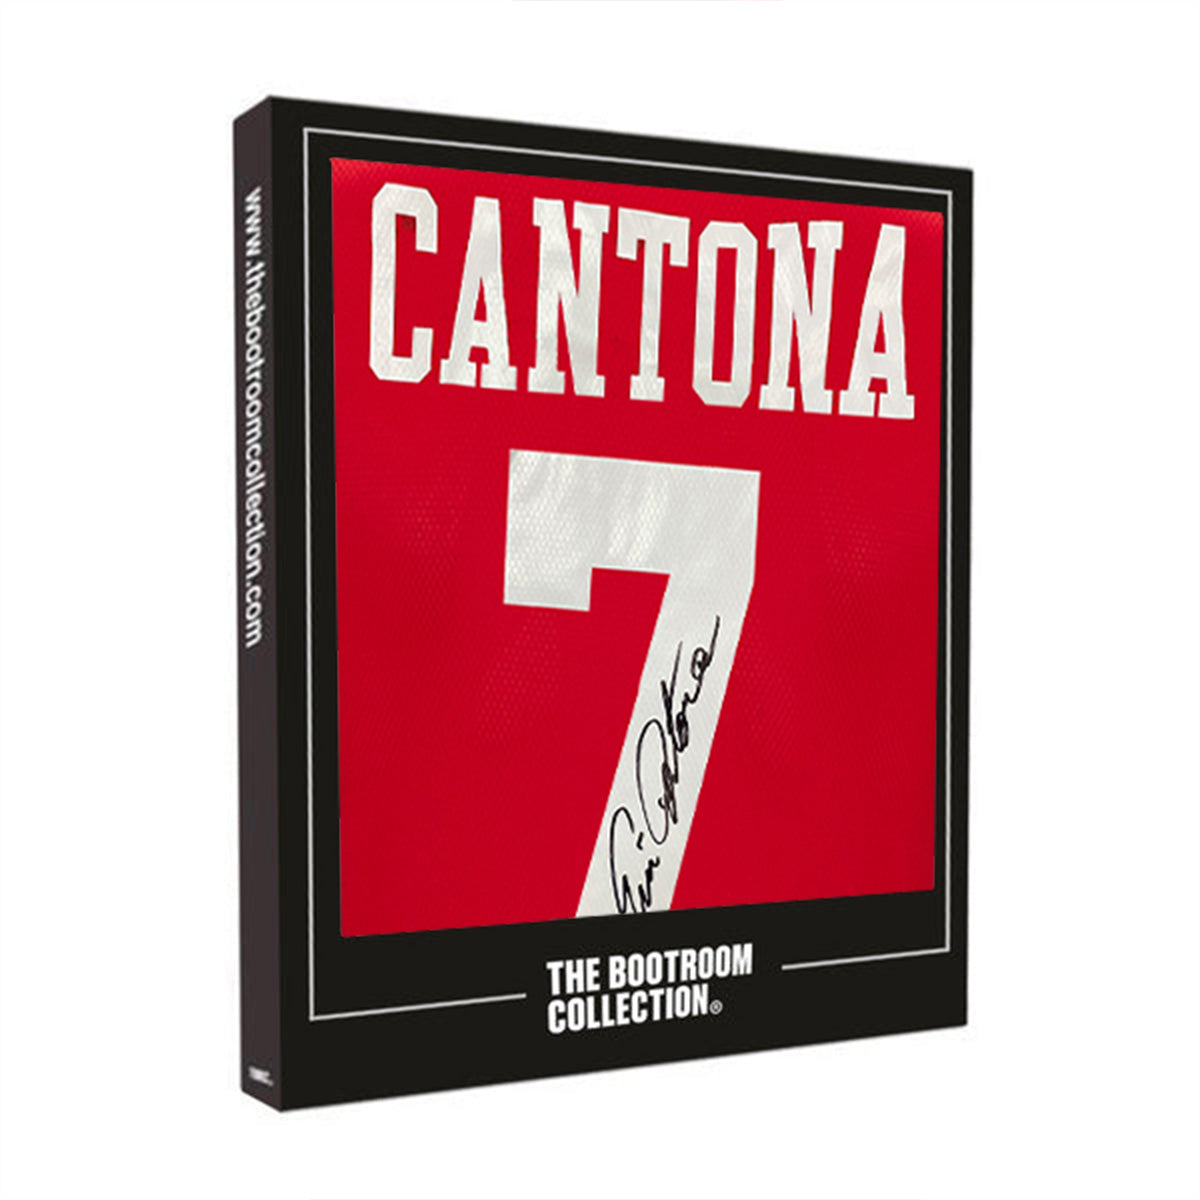 Eric Cantona 2019-20 Manchester United Signed #7 Home Shirt - The Bootroom Collection